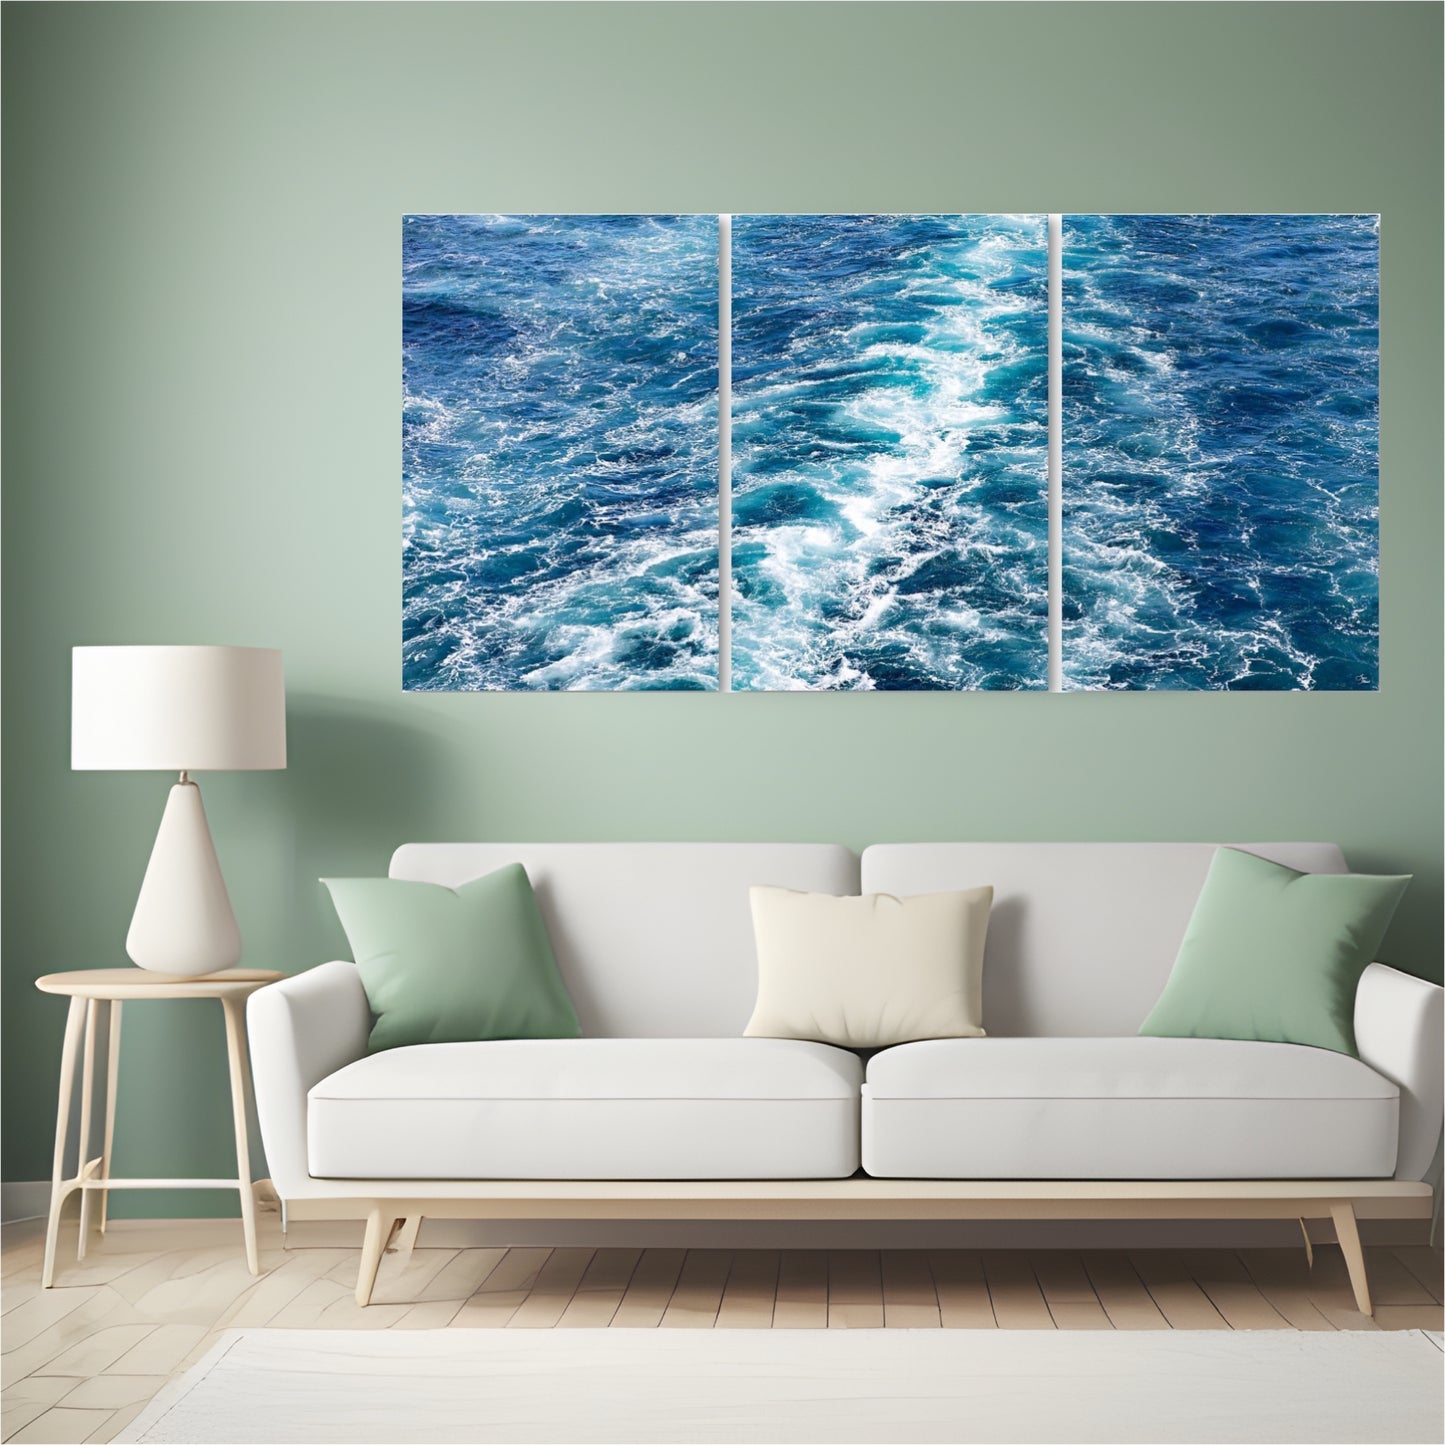 triptych blue ocean waves large wall art in seafoam green living area with neutral couch